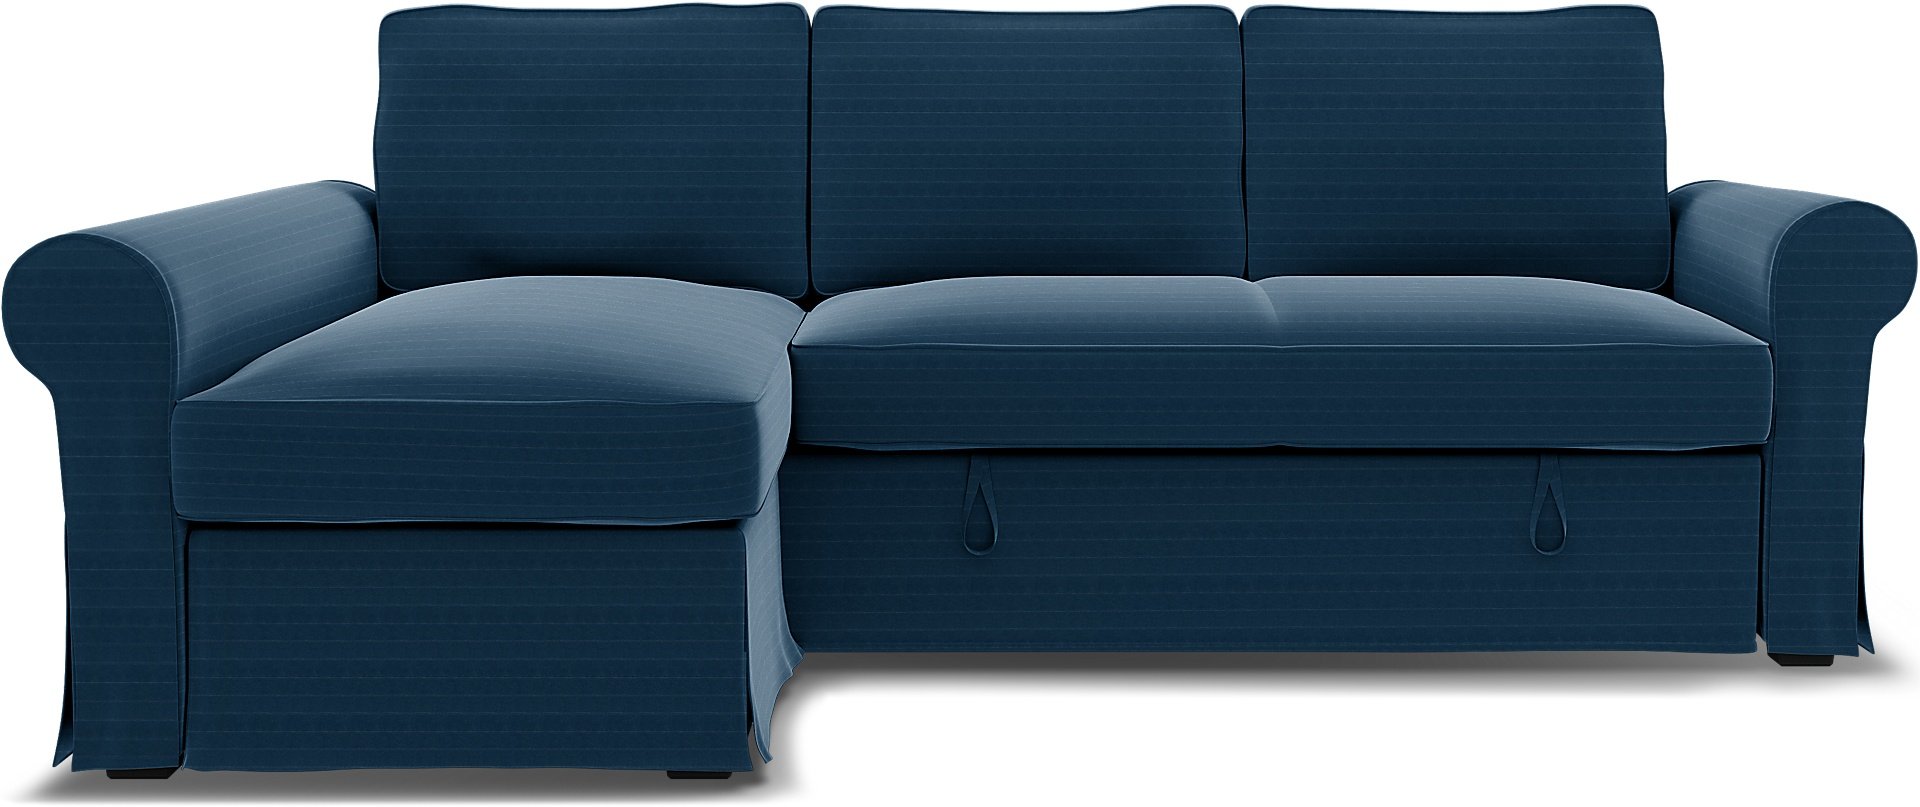 IKEA - Backabro Sofabed with Chaise Cover, Denim Blue, Velvet - Bemz